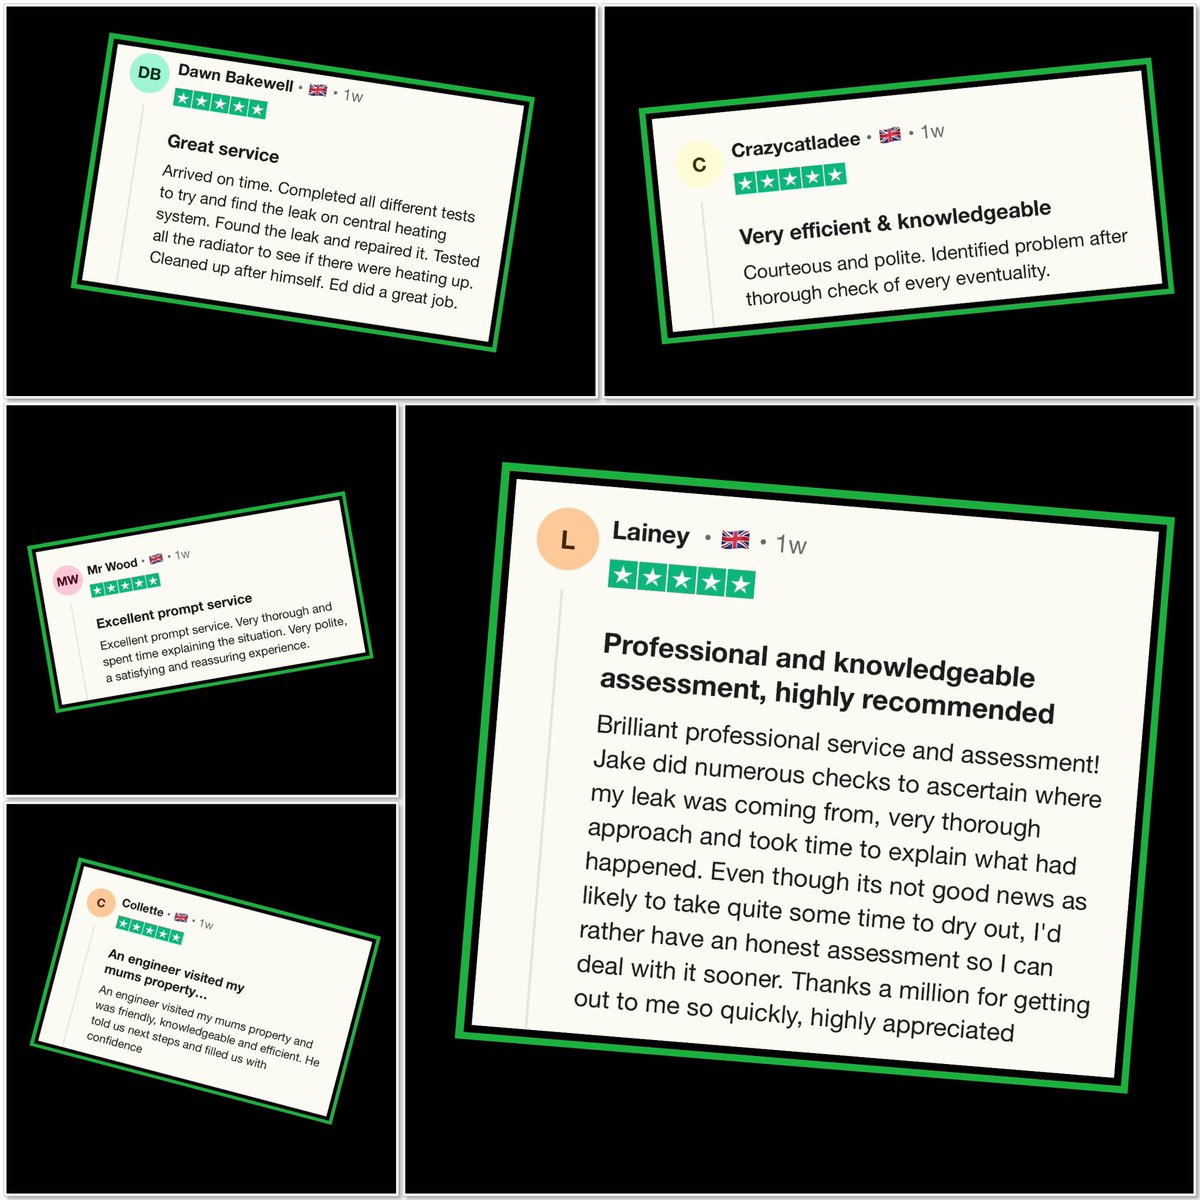 More fantastic reviews left on @Trustpilot ! Thank you so much to everyone for leaving your amazing comments. Well done #TeamSOS - proud of each and every one of you. #LeakDetection #Trustpilot #TrustPilotReviews